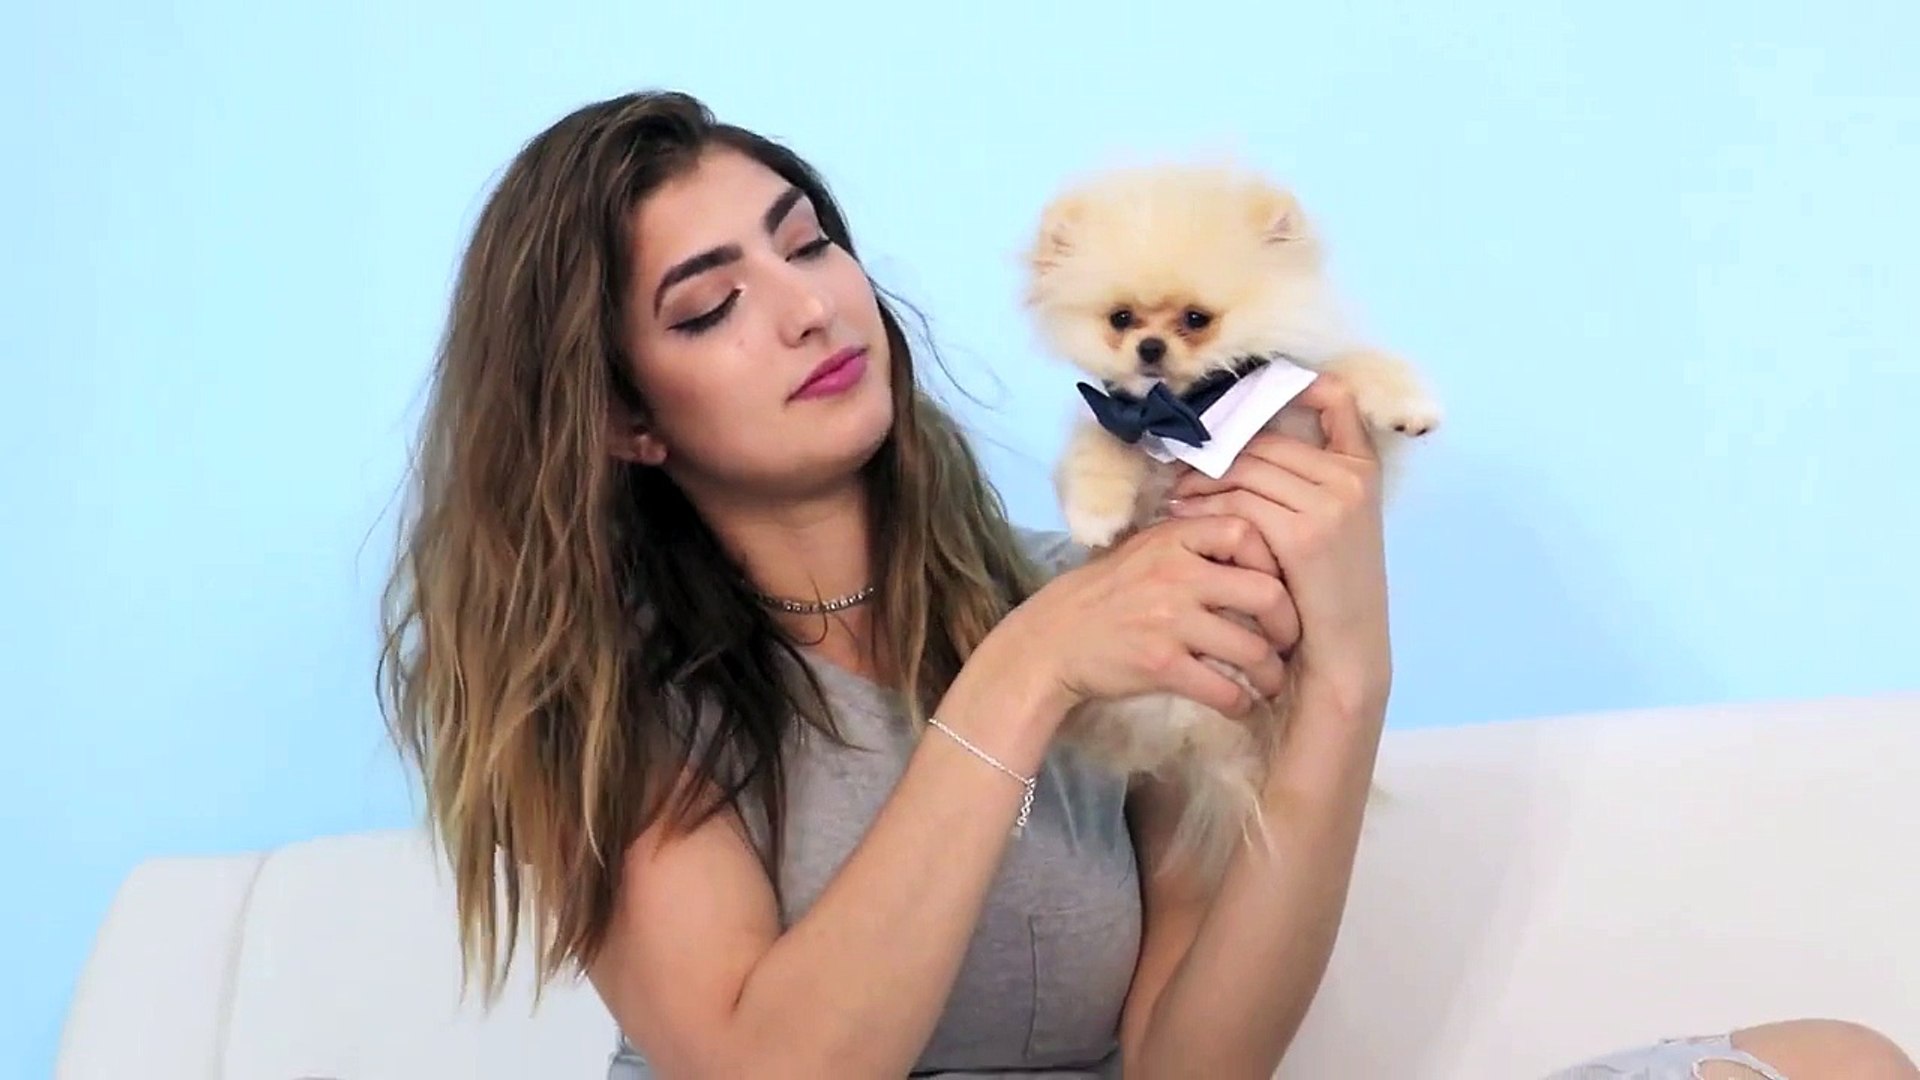 Rclbeauty101 Testing Out Weird Dog Gadgets With New Puppy